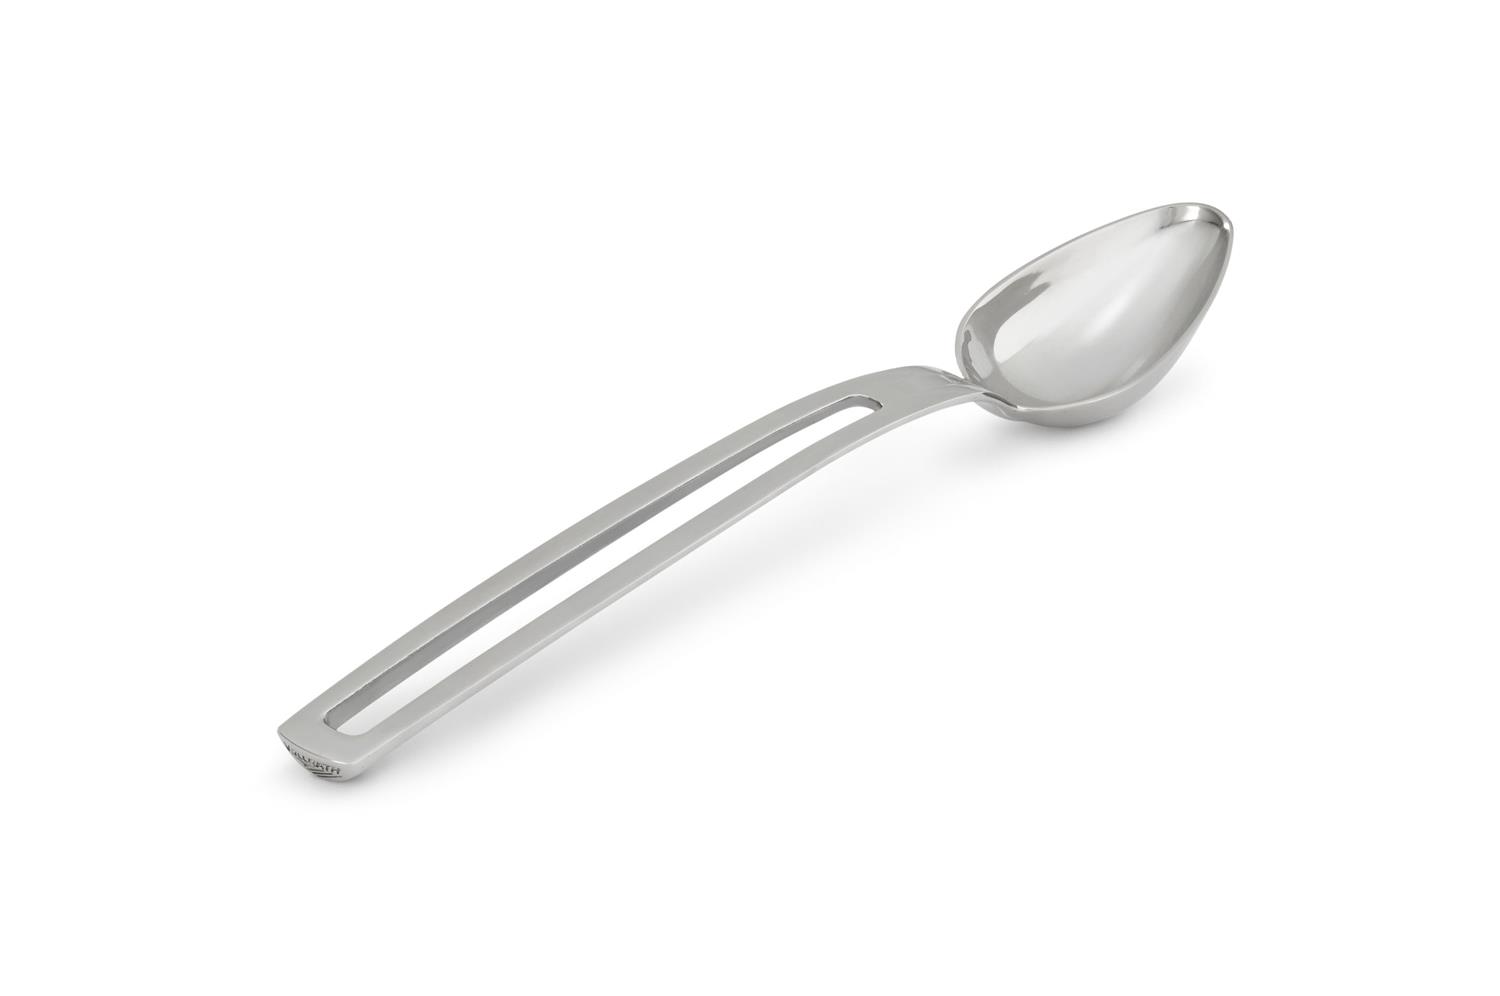 Vollrath 46720 Oval Serving Spoon, Solid Bowl, 1 oz